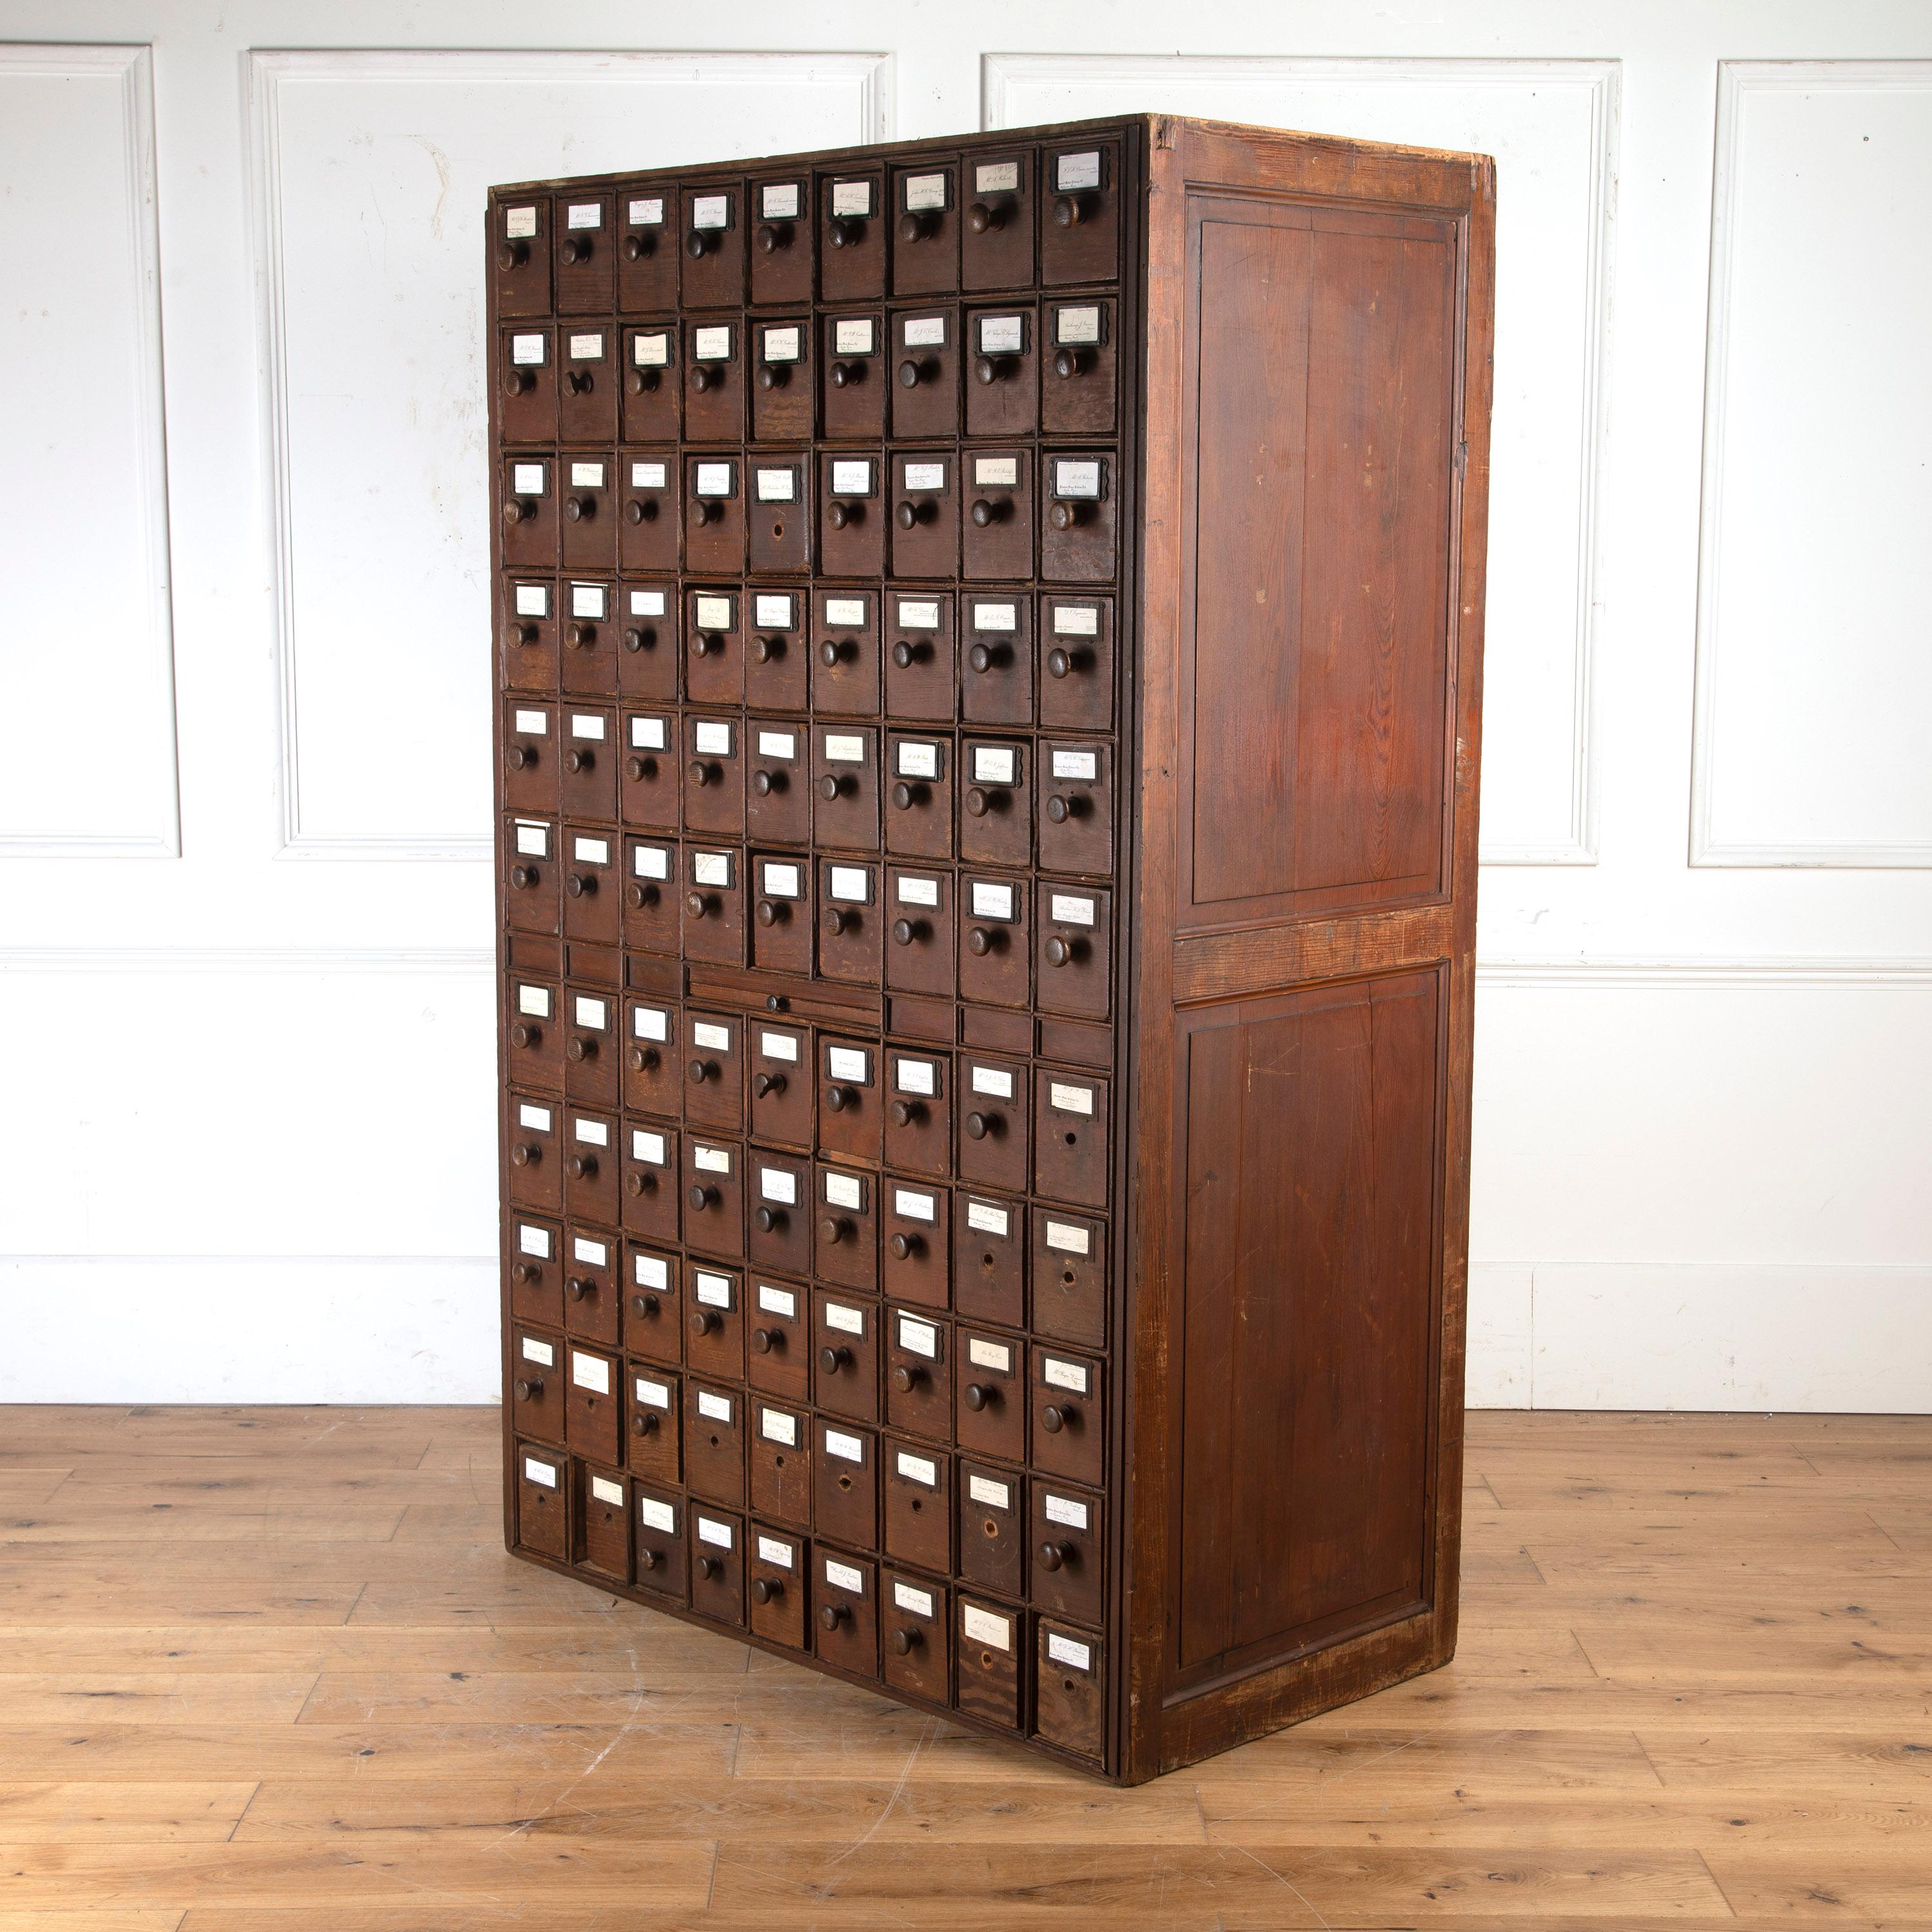 Fantastic late 19th century stained pine solicitor's filing cabinet.

This rare cabinet comprises a bank of 99 drawers, all set within a tall cabinet with panelled sides. Each drawer features dipped sides to allow easy access to its contents.